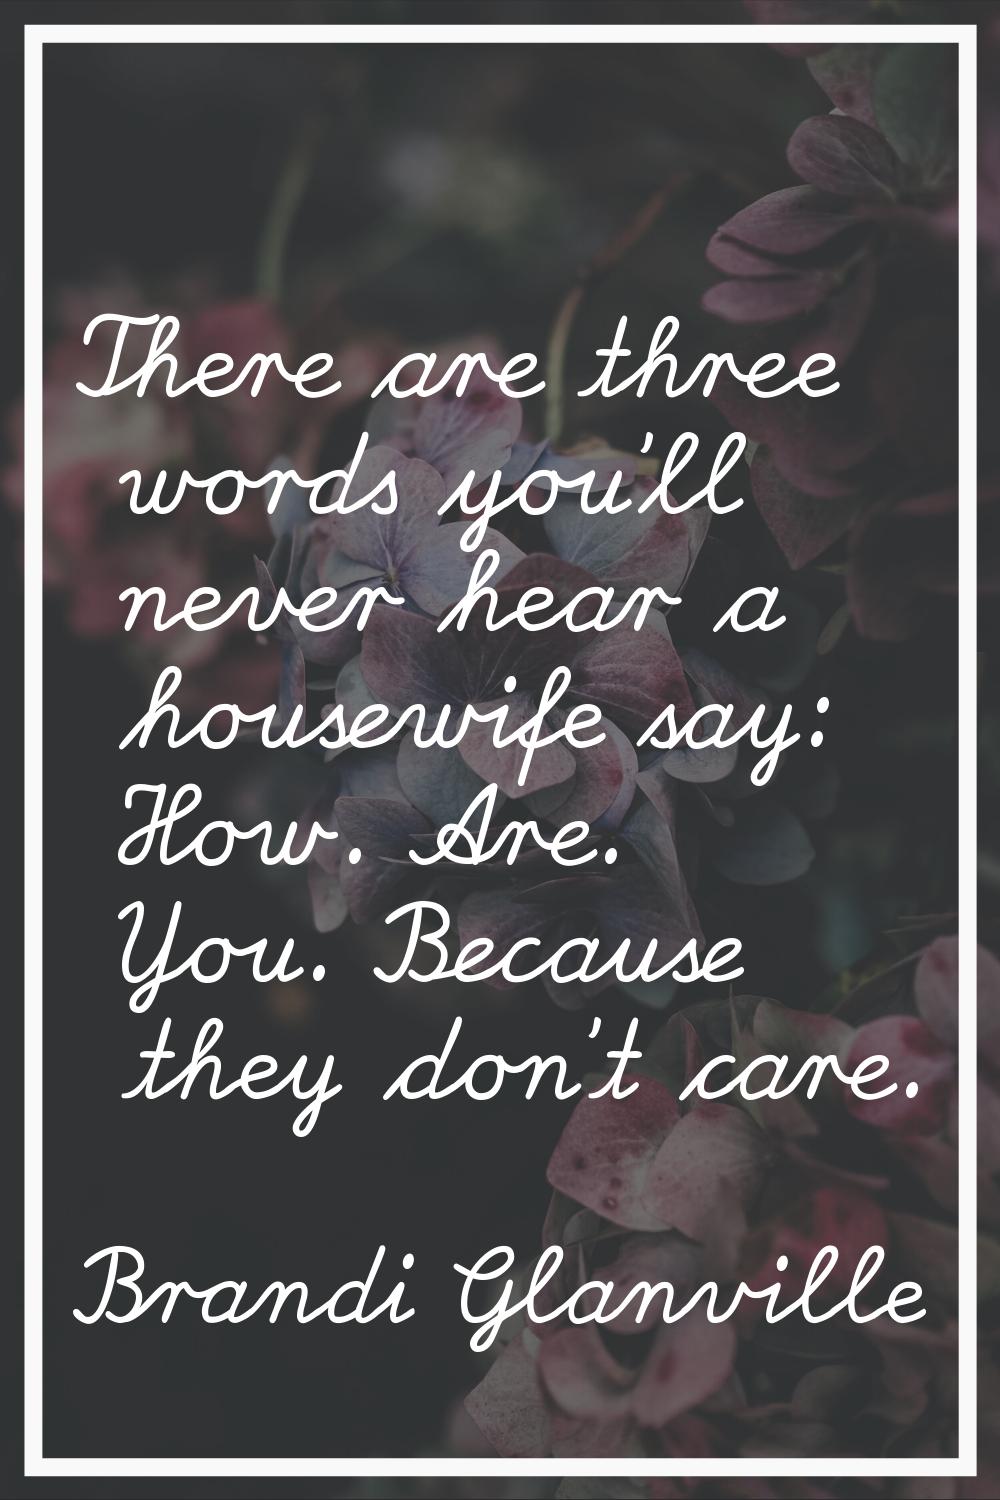 There are three words you'll never hear a housewife say: How. Are. You. Because they don't care.